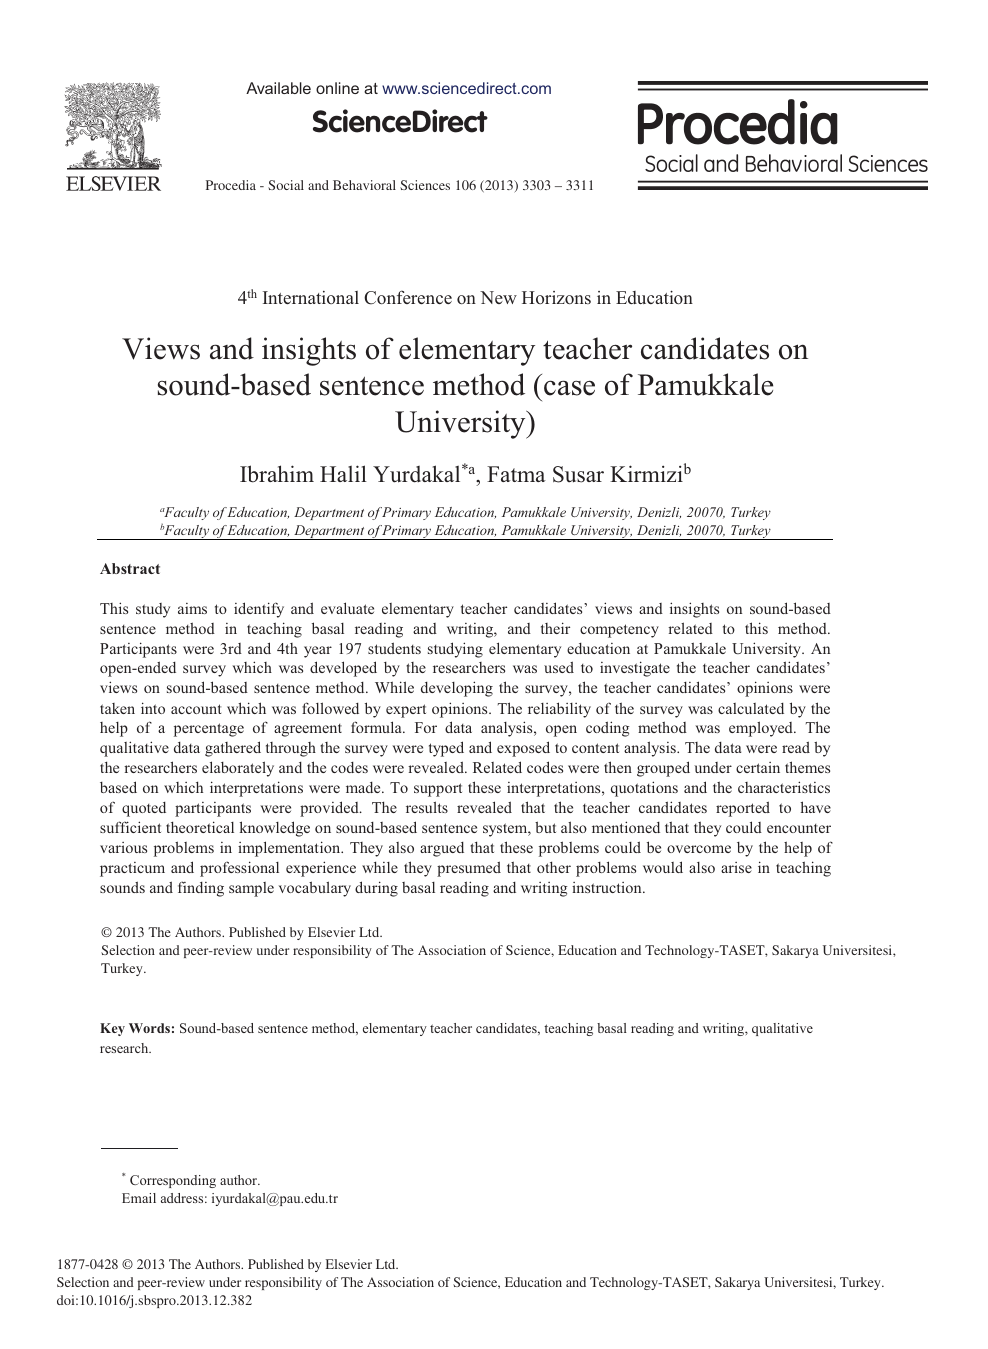 Views and Insights of Elementary Teacher Candidates on Sound-based